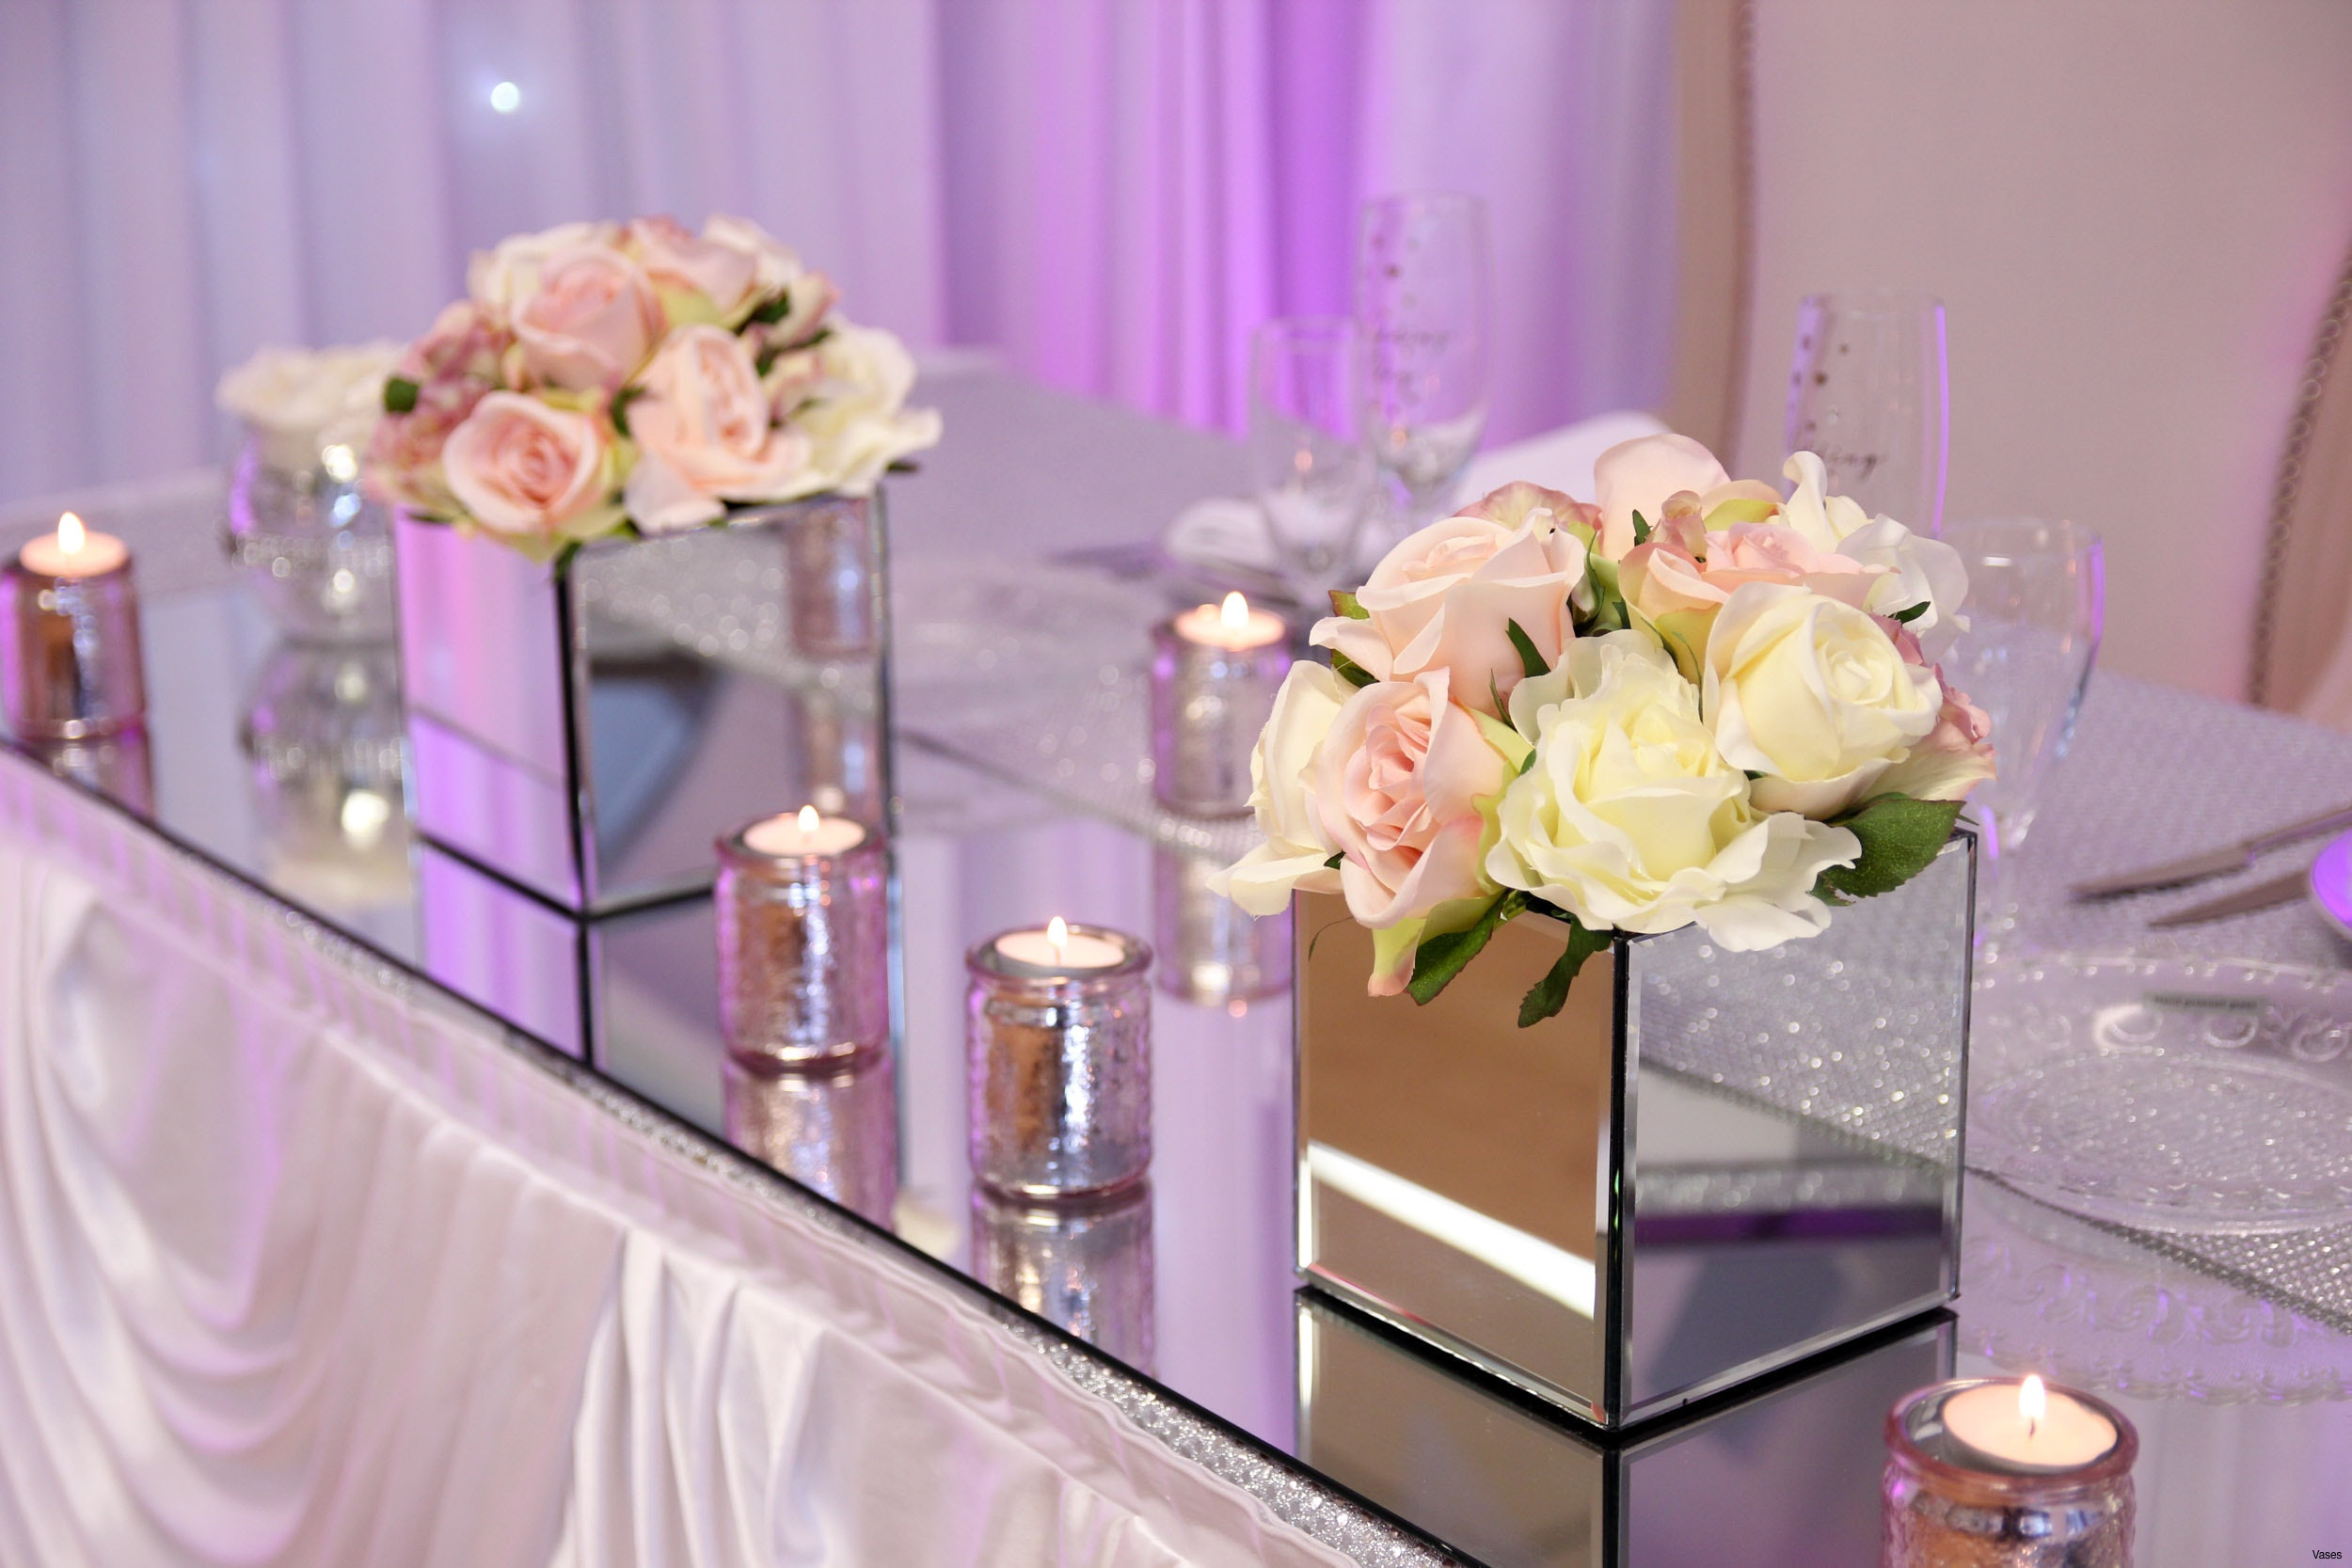 13 Stunning Wedding Sand Vase Sets 2024 free download wedding sand vase sets of photos of 3 vase centerpieces vases artificial plants collection pertaining to 3 vase centerpieces pics centerpiece decorations for weddings rate mirrored square va